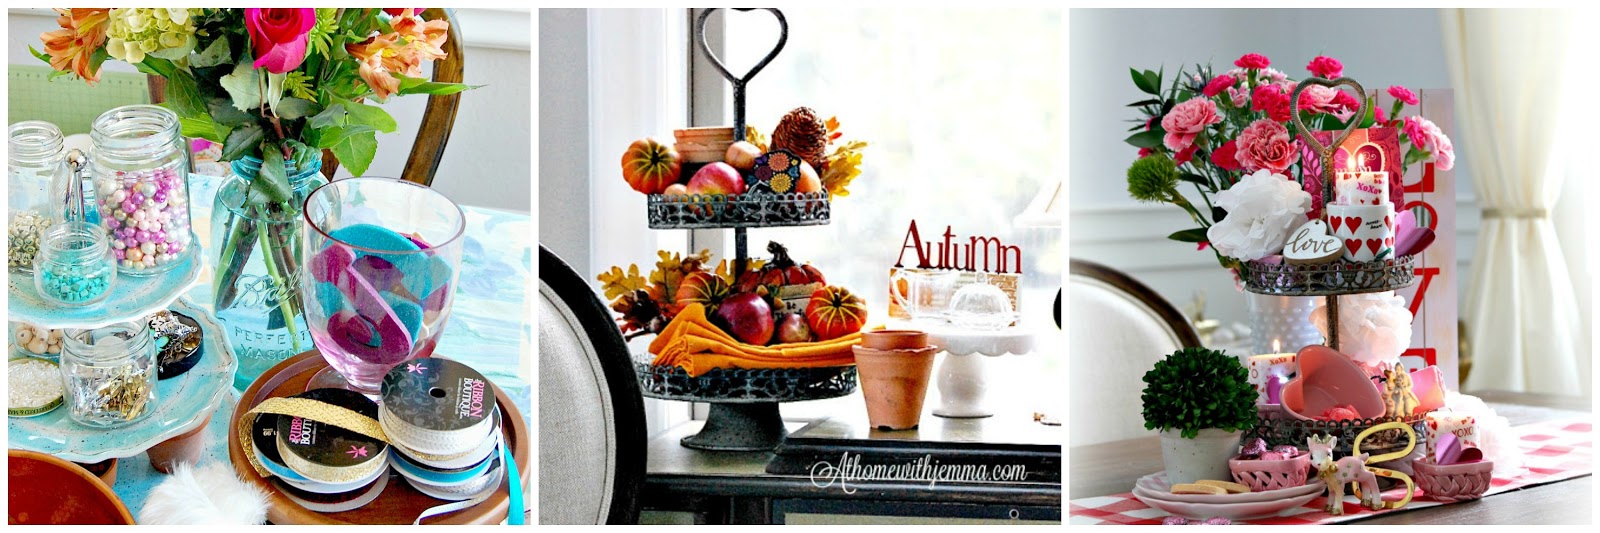 Tiered Tray Style Tips – Hallstrom Home